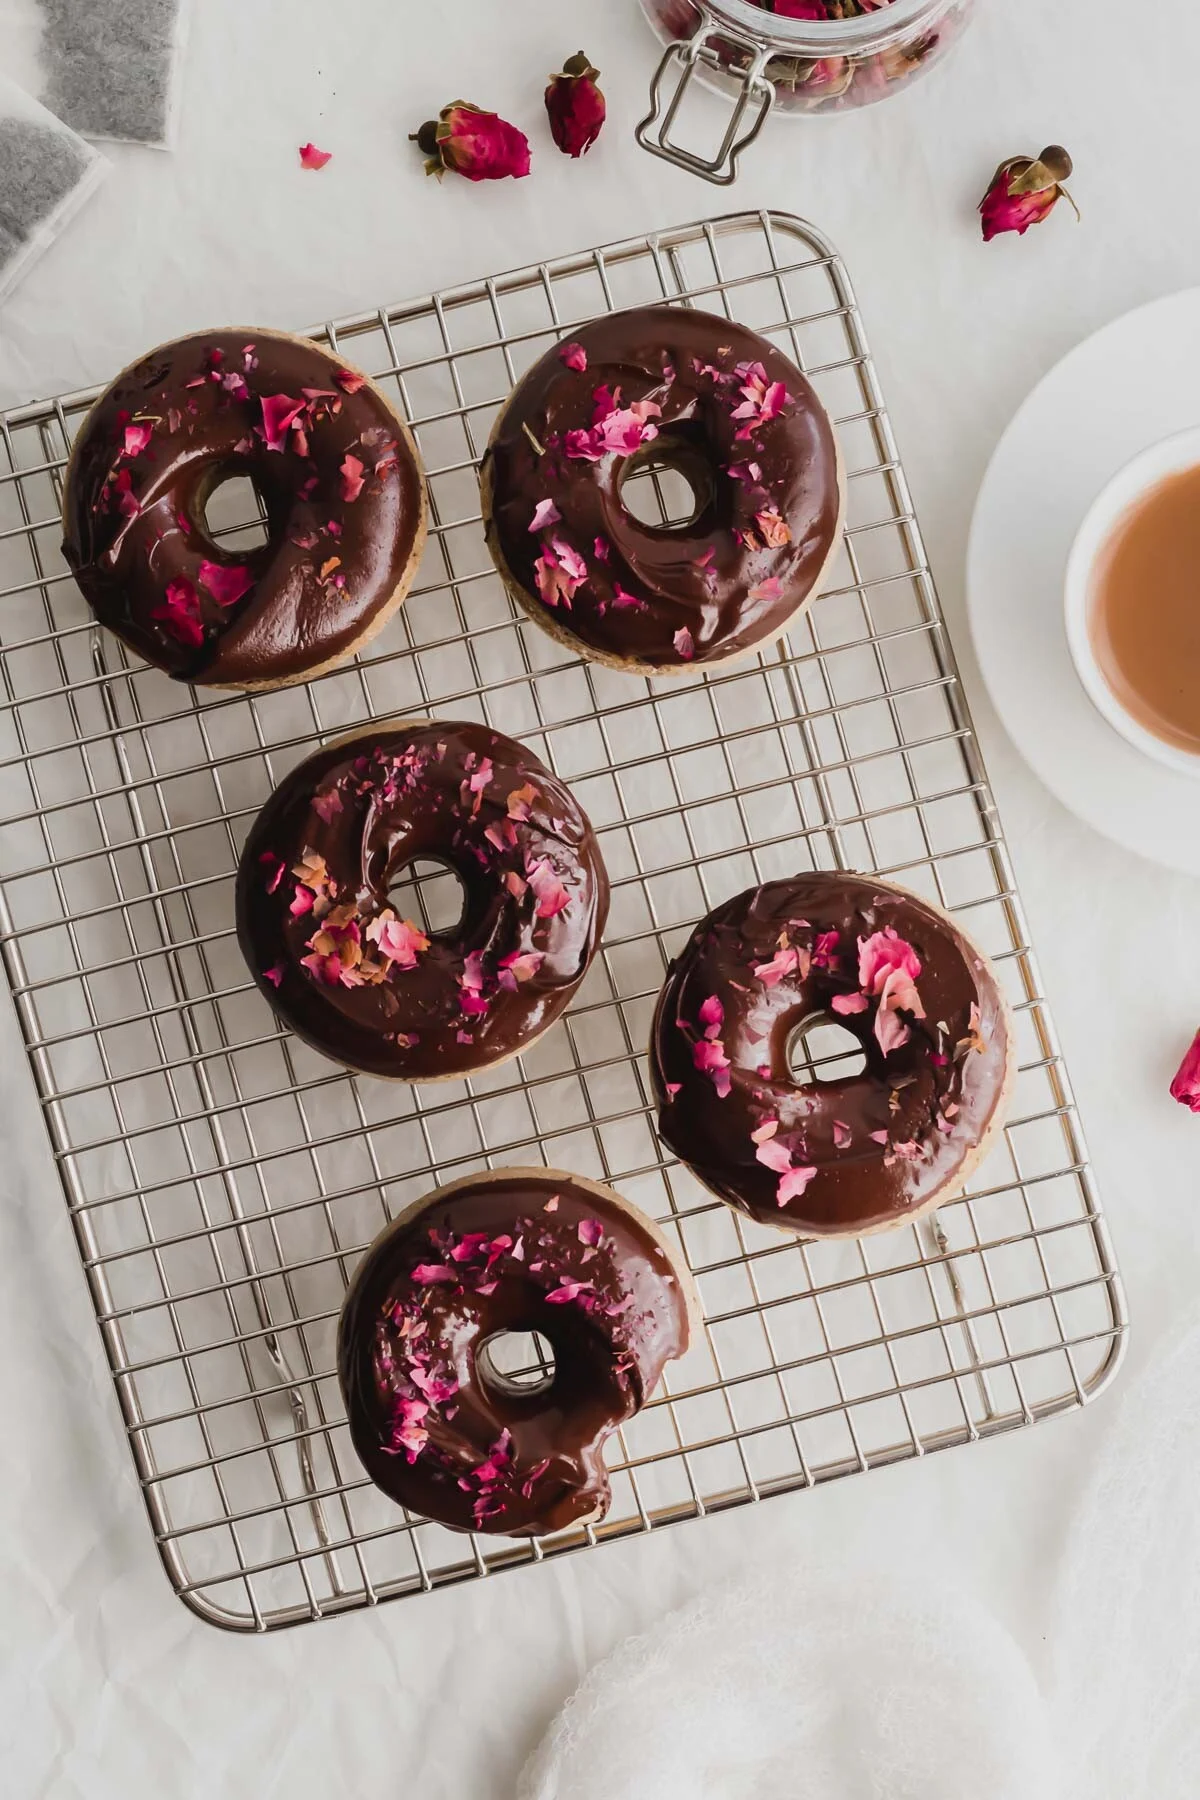 Earl Grey cake doughnuts with chocolate glaze and edible rose petals.